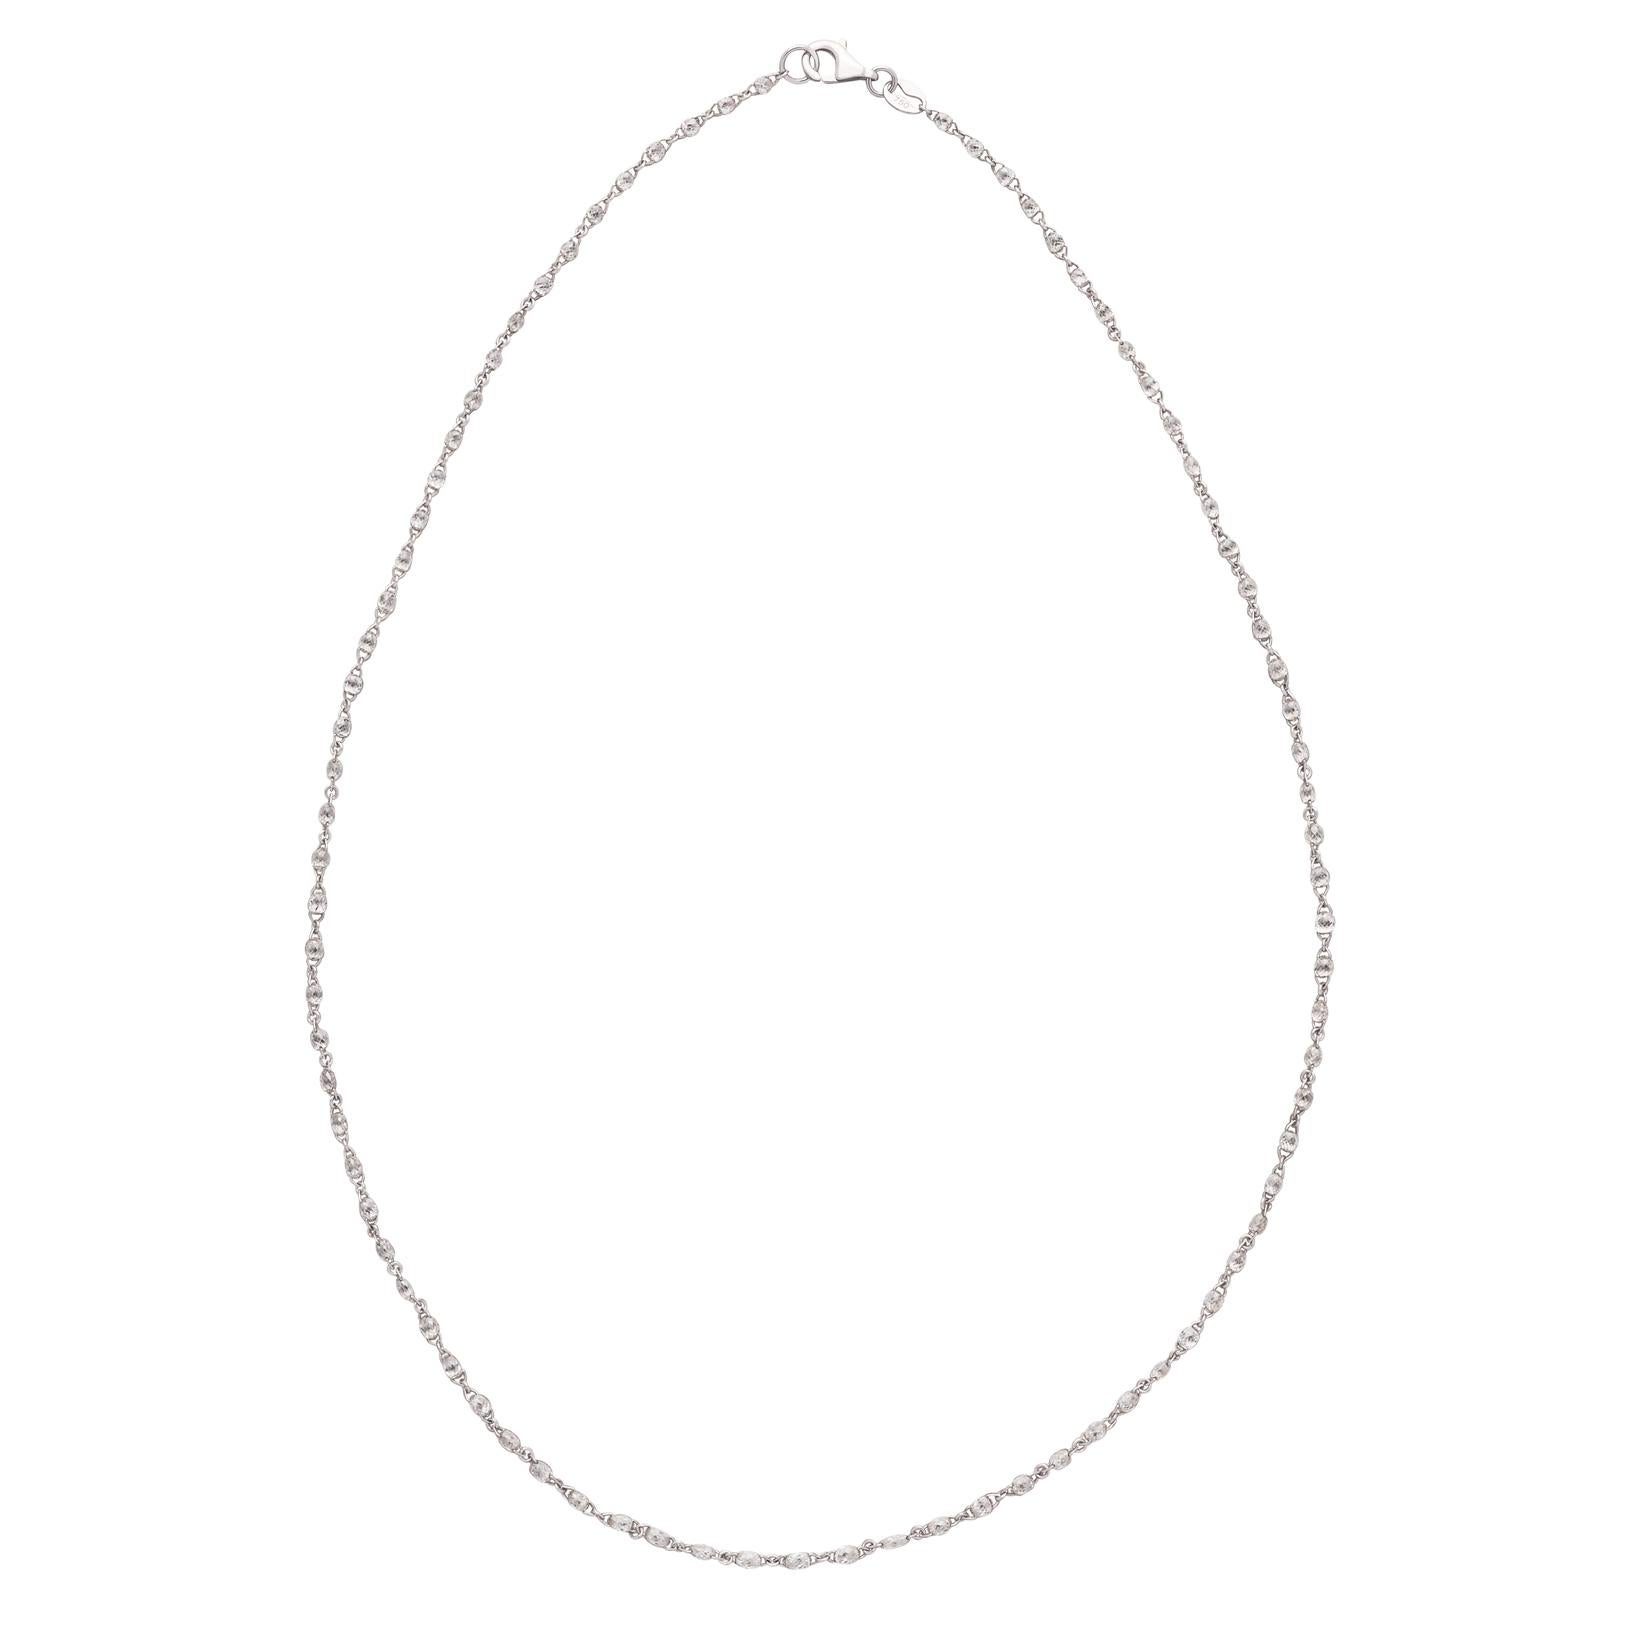 7.57 Carat Diamond Necklace in 18kt White Gold